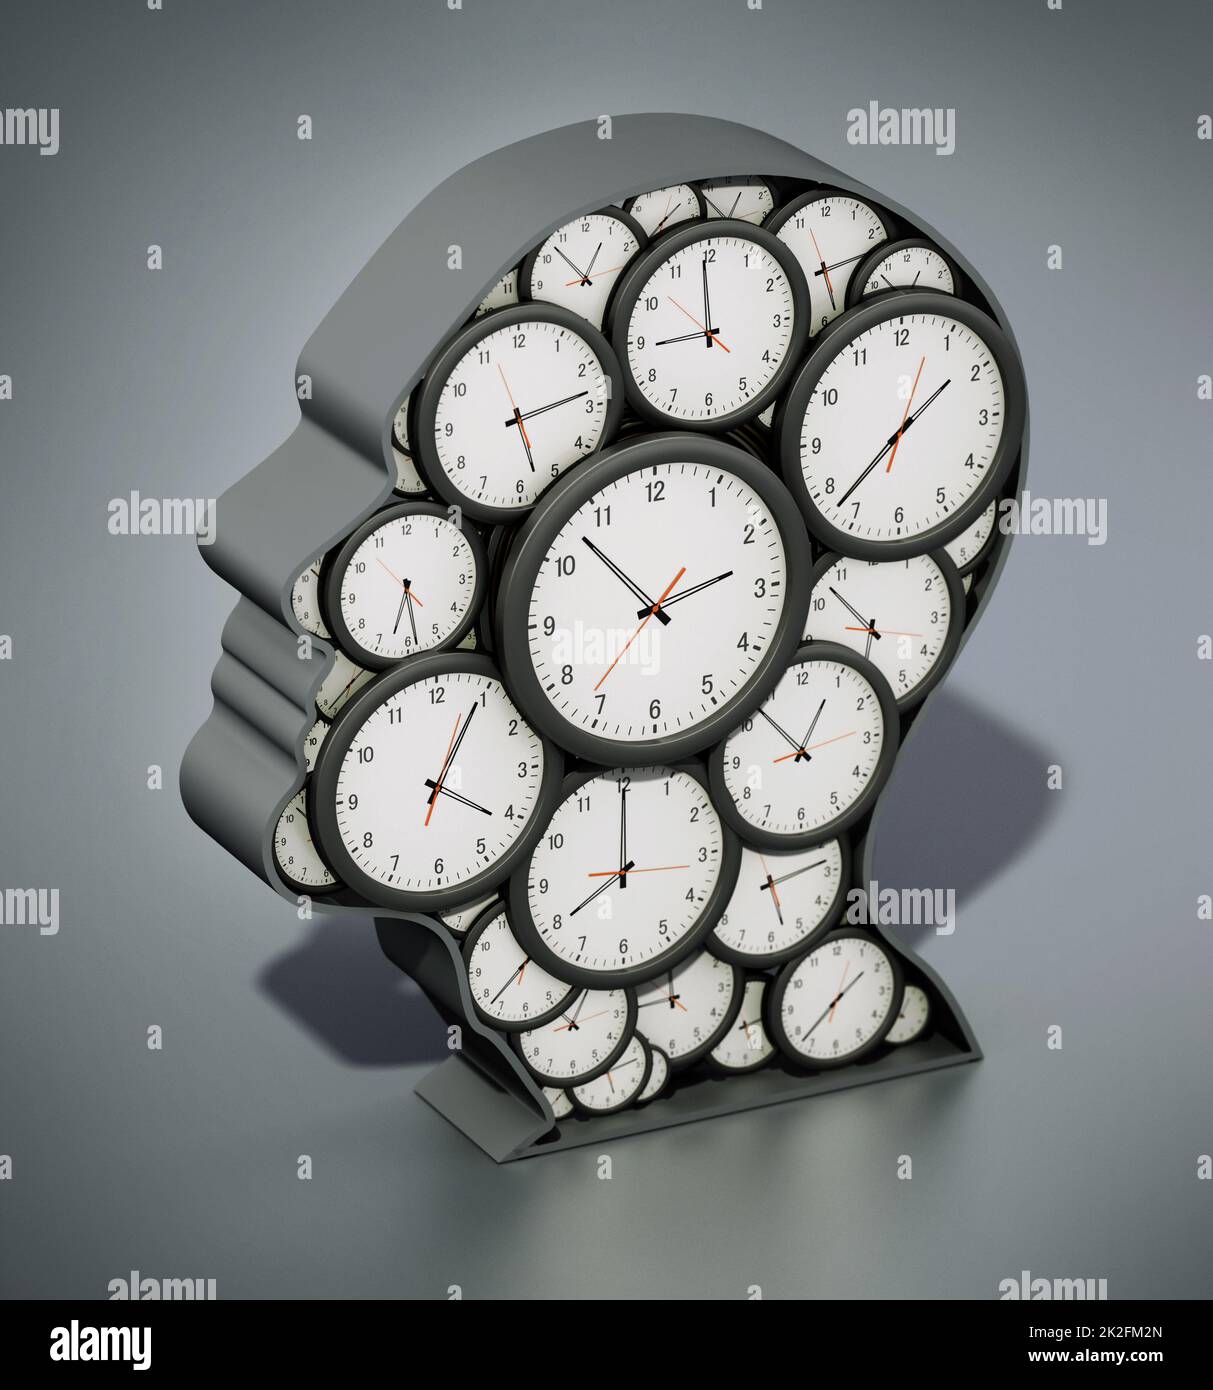 Group of clocks forming a head shape. 3D illustration Stock Photo